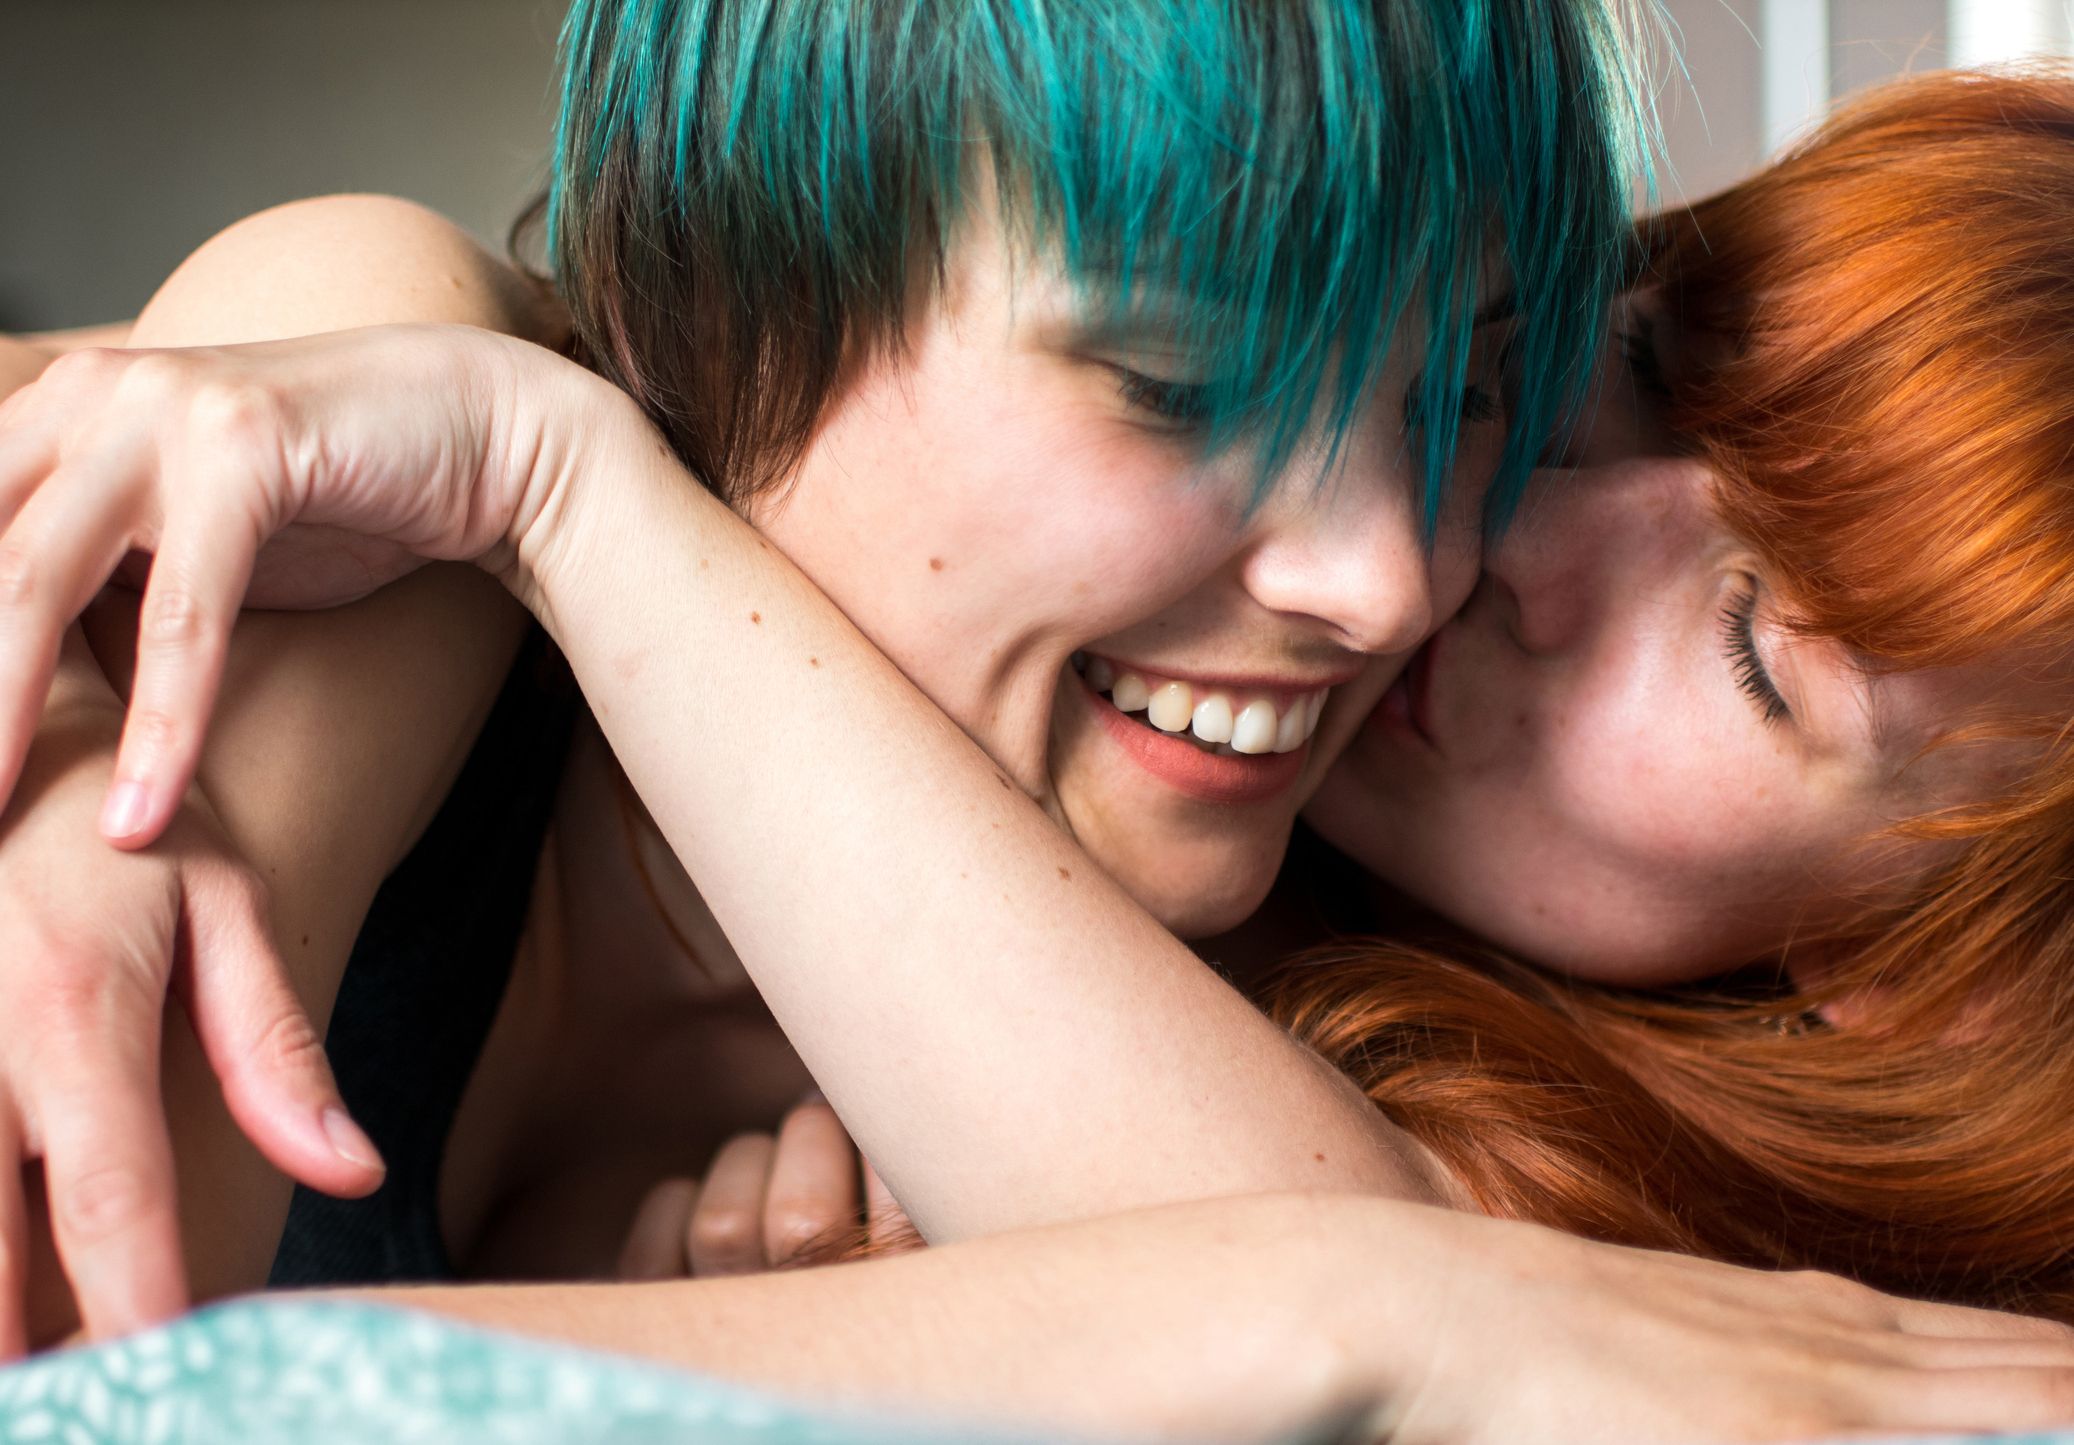 Bisexual People Shares Differences Between Sex With Women and